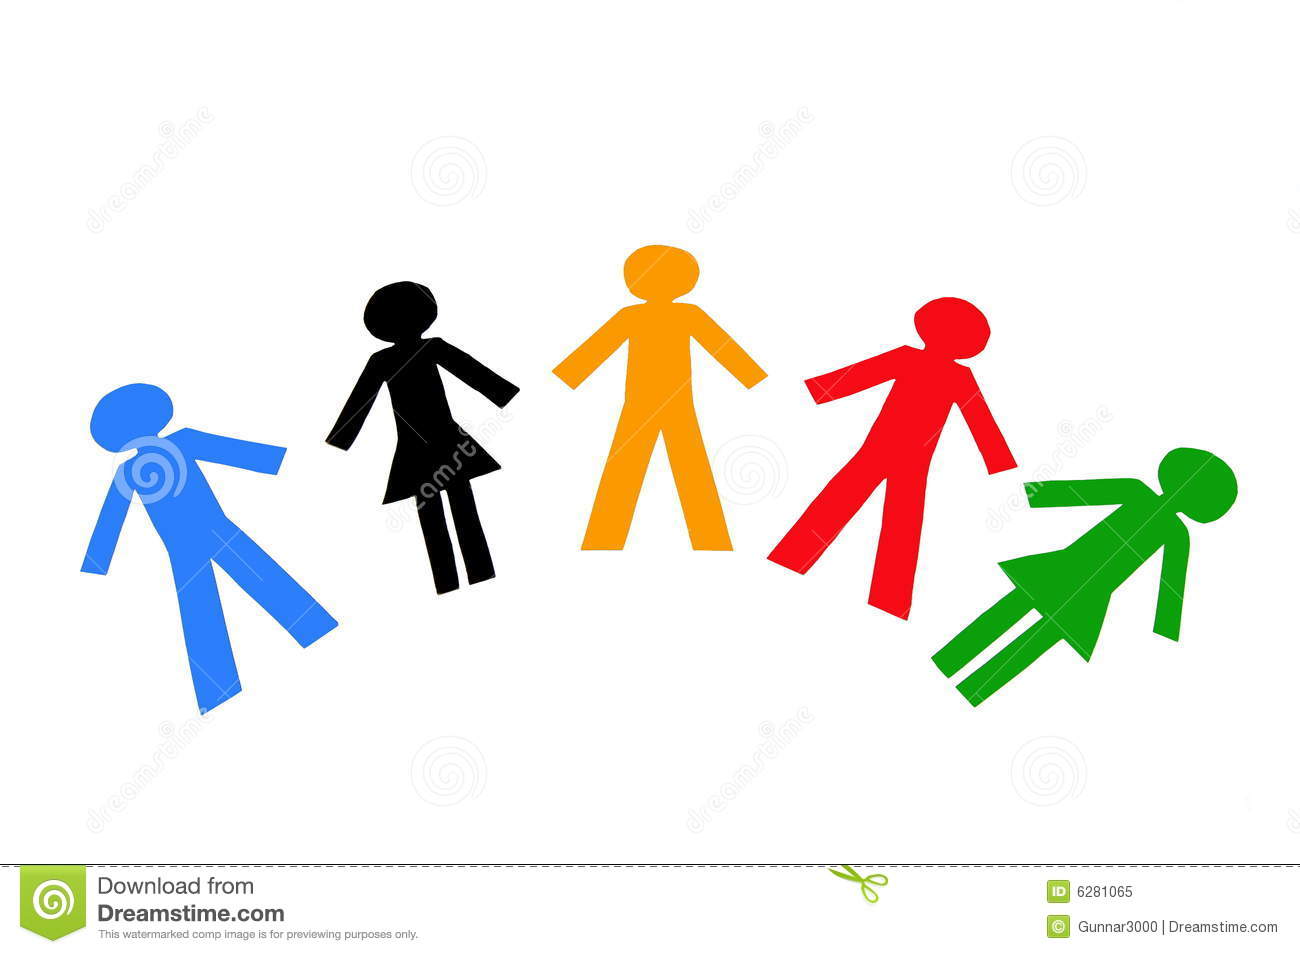 Equality and Diversity Clip Art